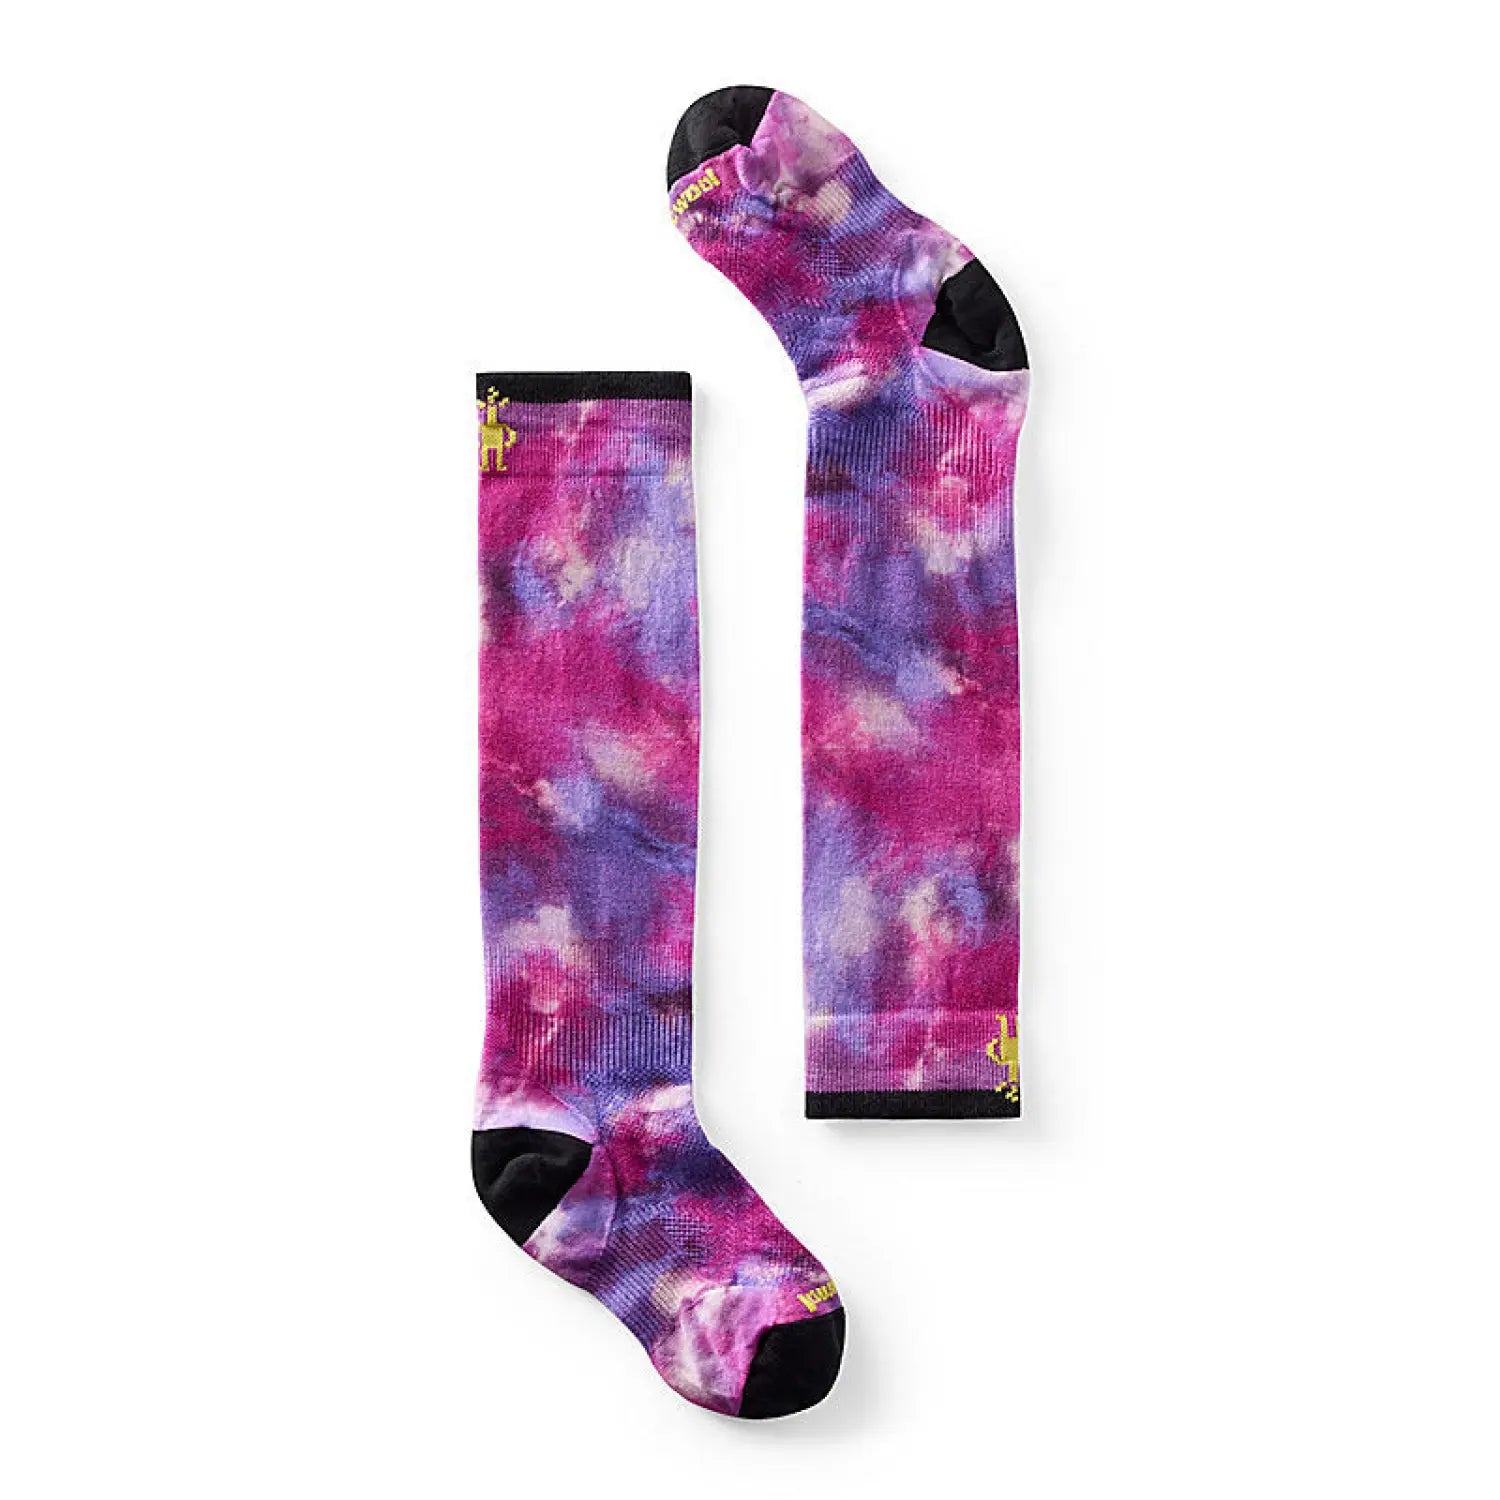 Smartwool Kids over the calf ski socks in shade of pink and purple tie dye.